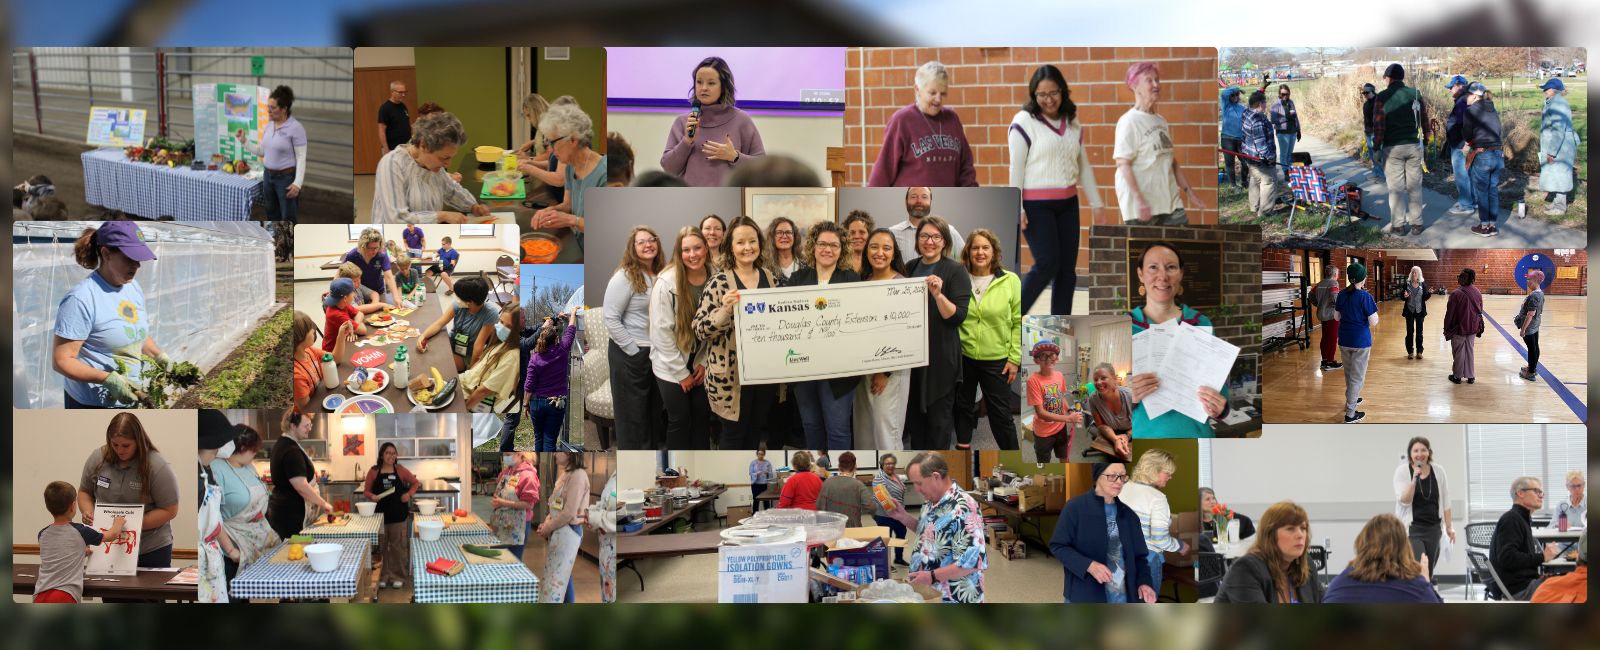 collage of all of Douglas County Kansas program areas in action